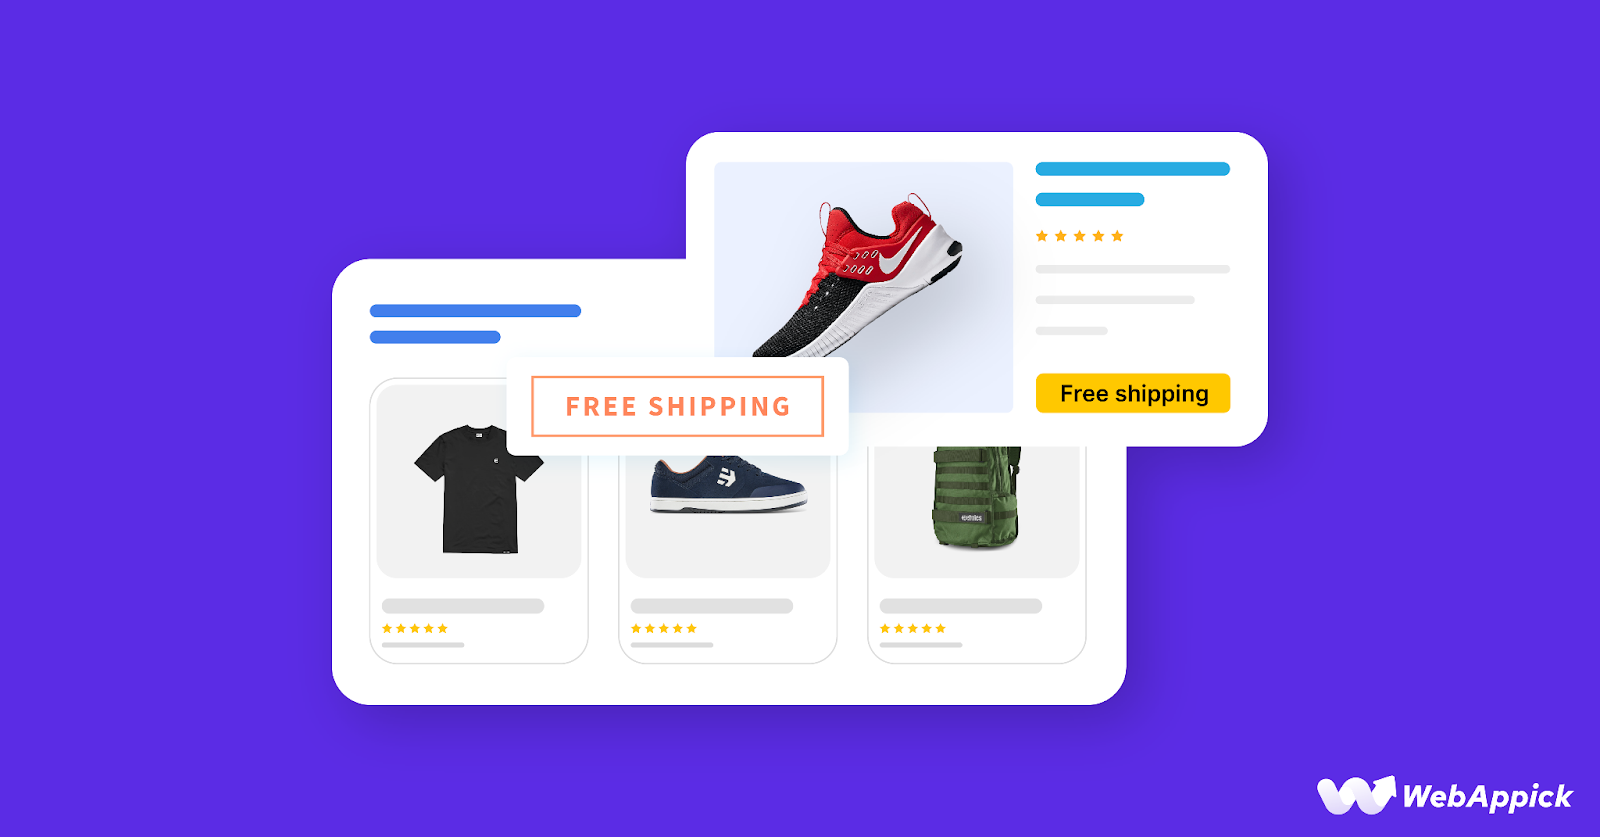 Offer Free Shipping 